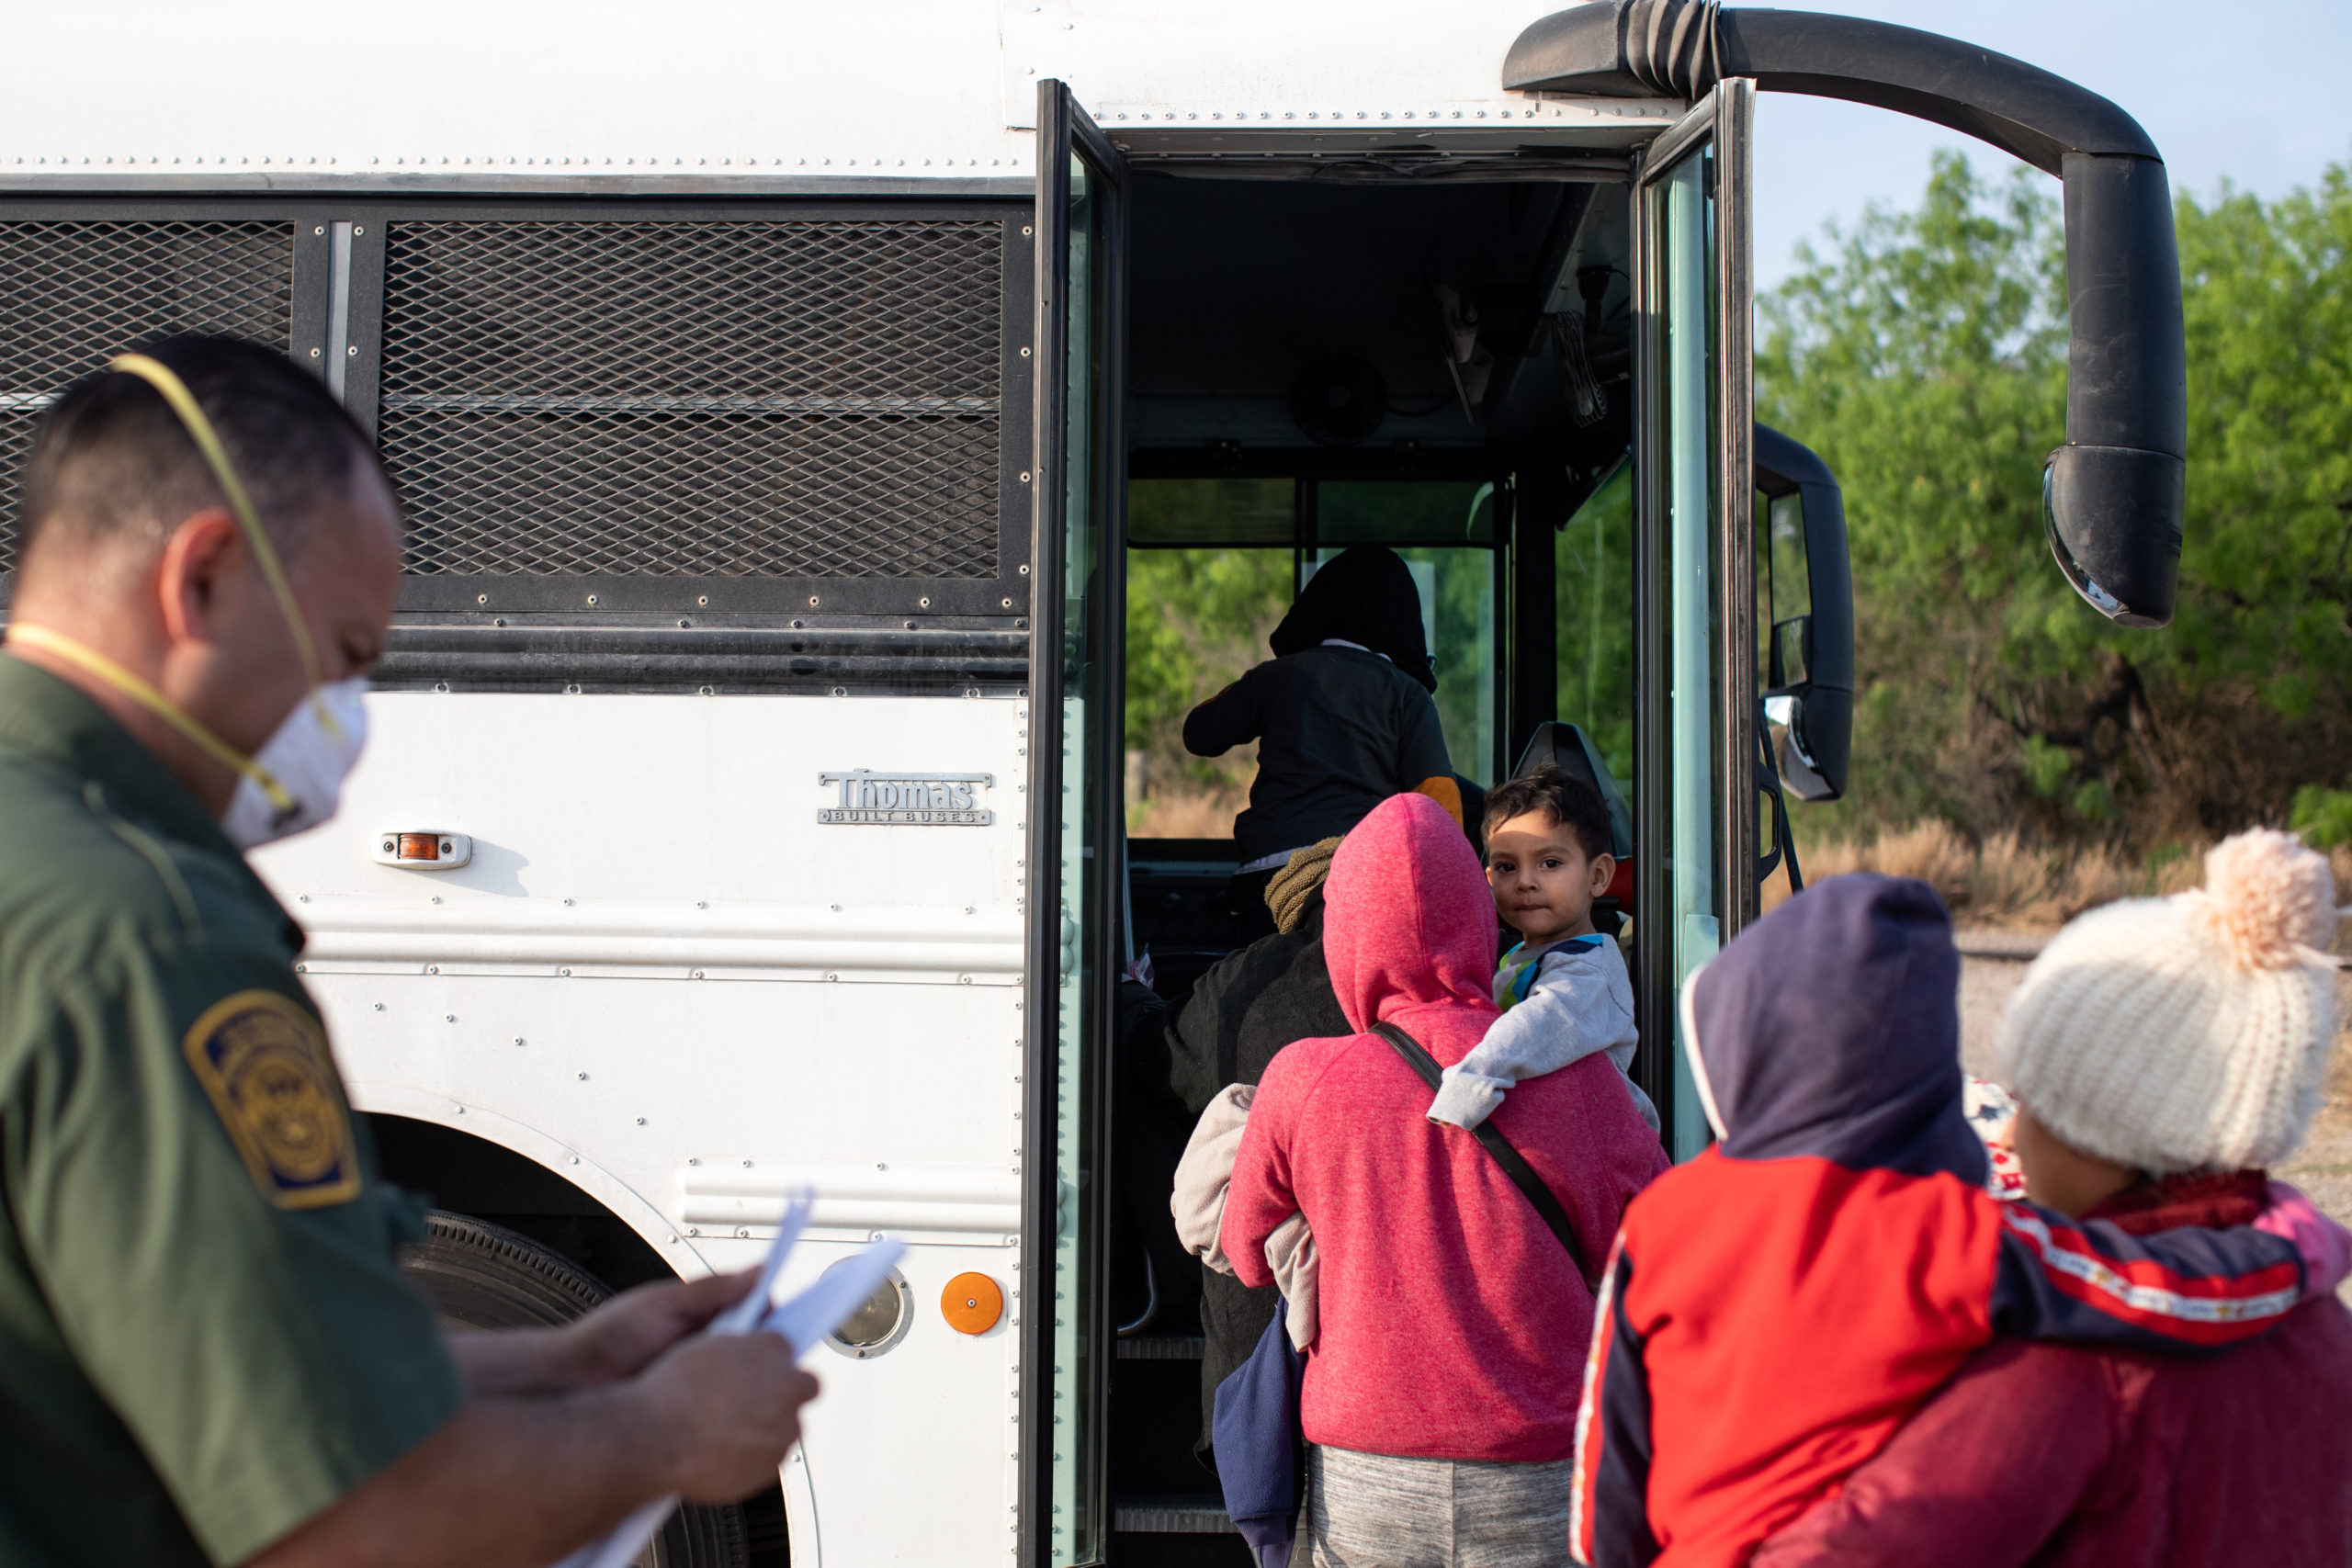 Illegal migrants wait to be transported to Customs and Border Protection facilities after waiting overnight next to a road in La Joya, Texas on March 27, 2021. (Kaylee Greenlee - Daily Caller News Foundation)